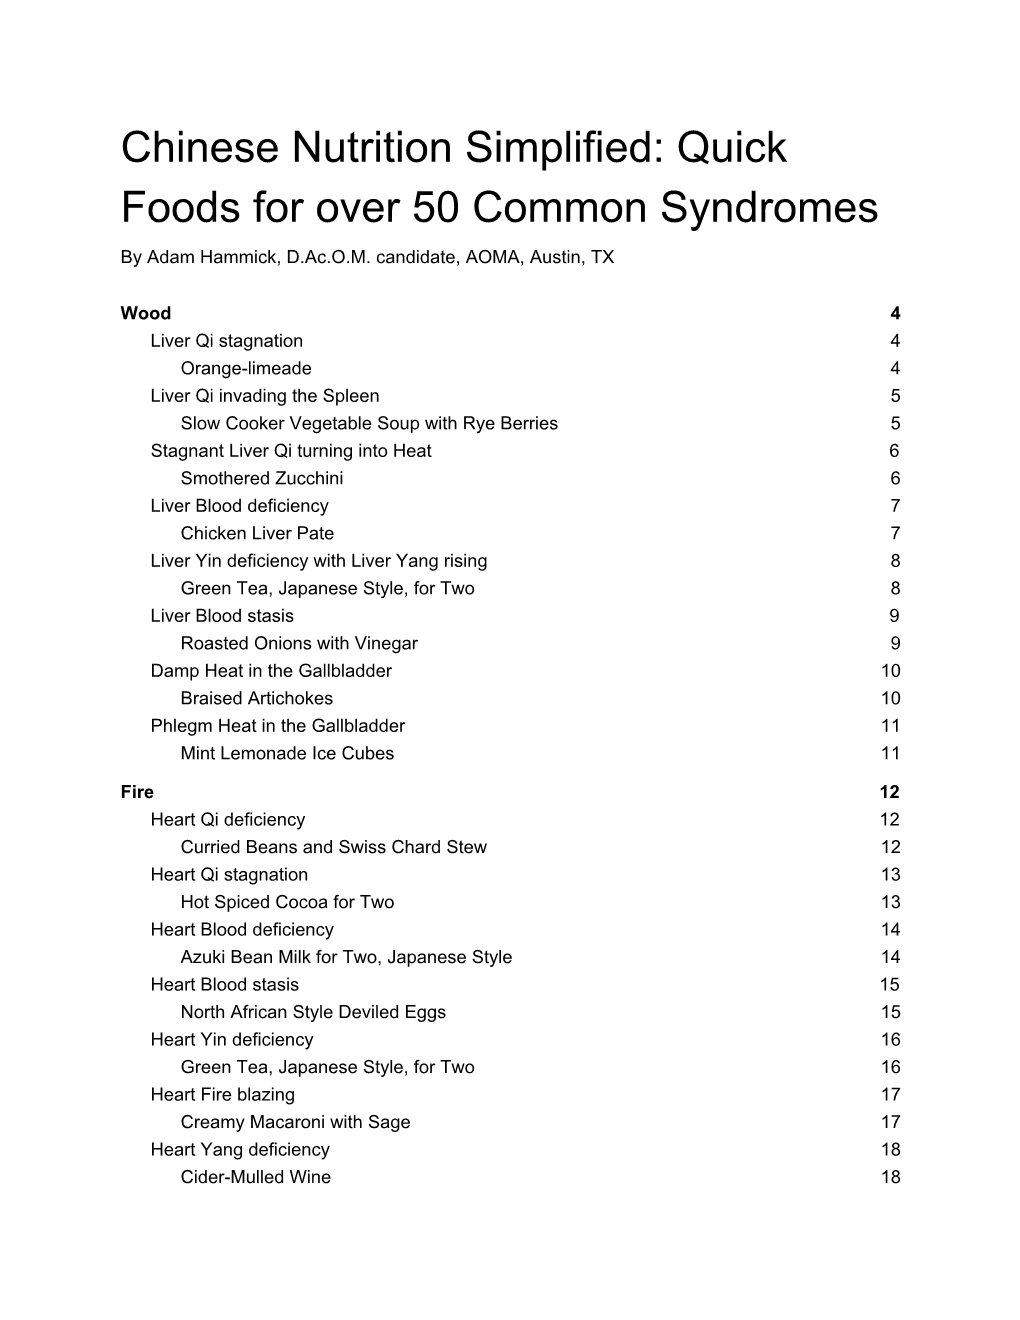 Chinese Nutrition Simplified: Quick Foods for Over 50 Common Syndromes by Adam Hammick, D.Ac.O.M